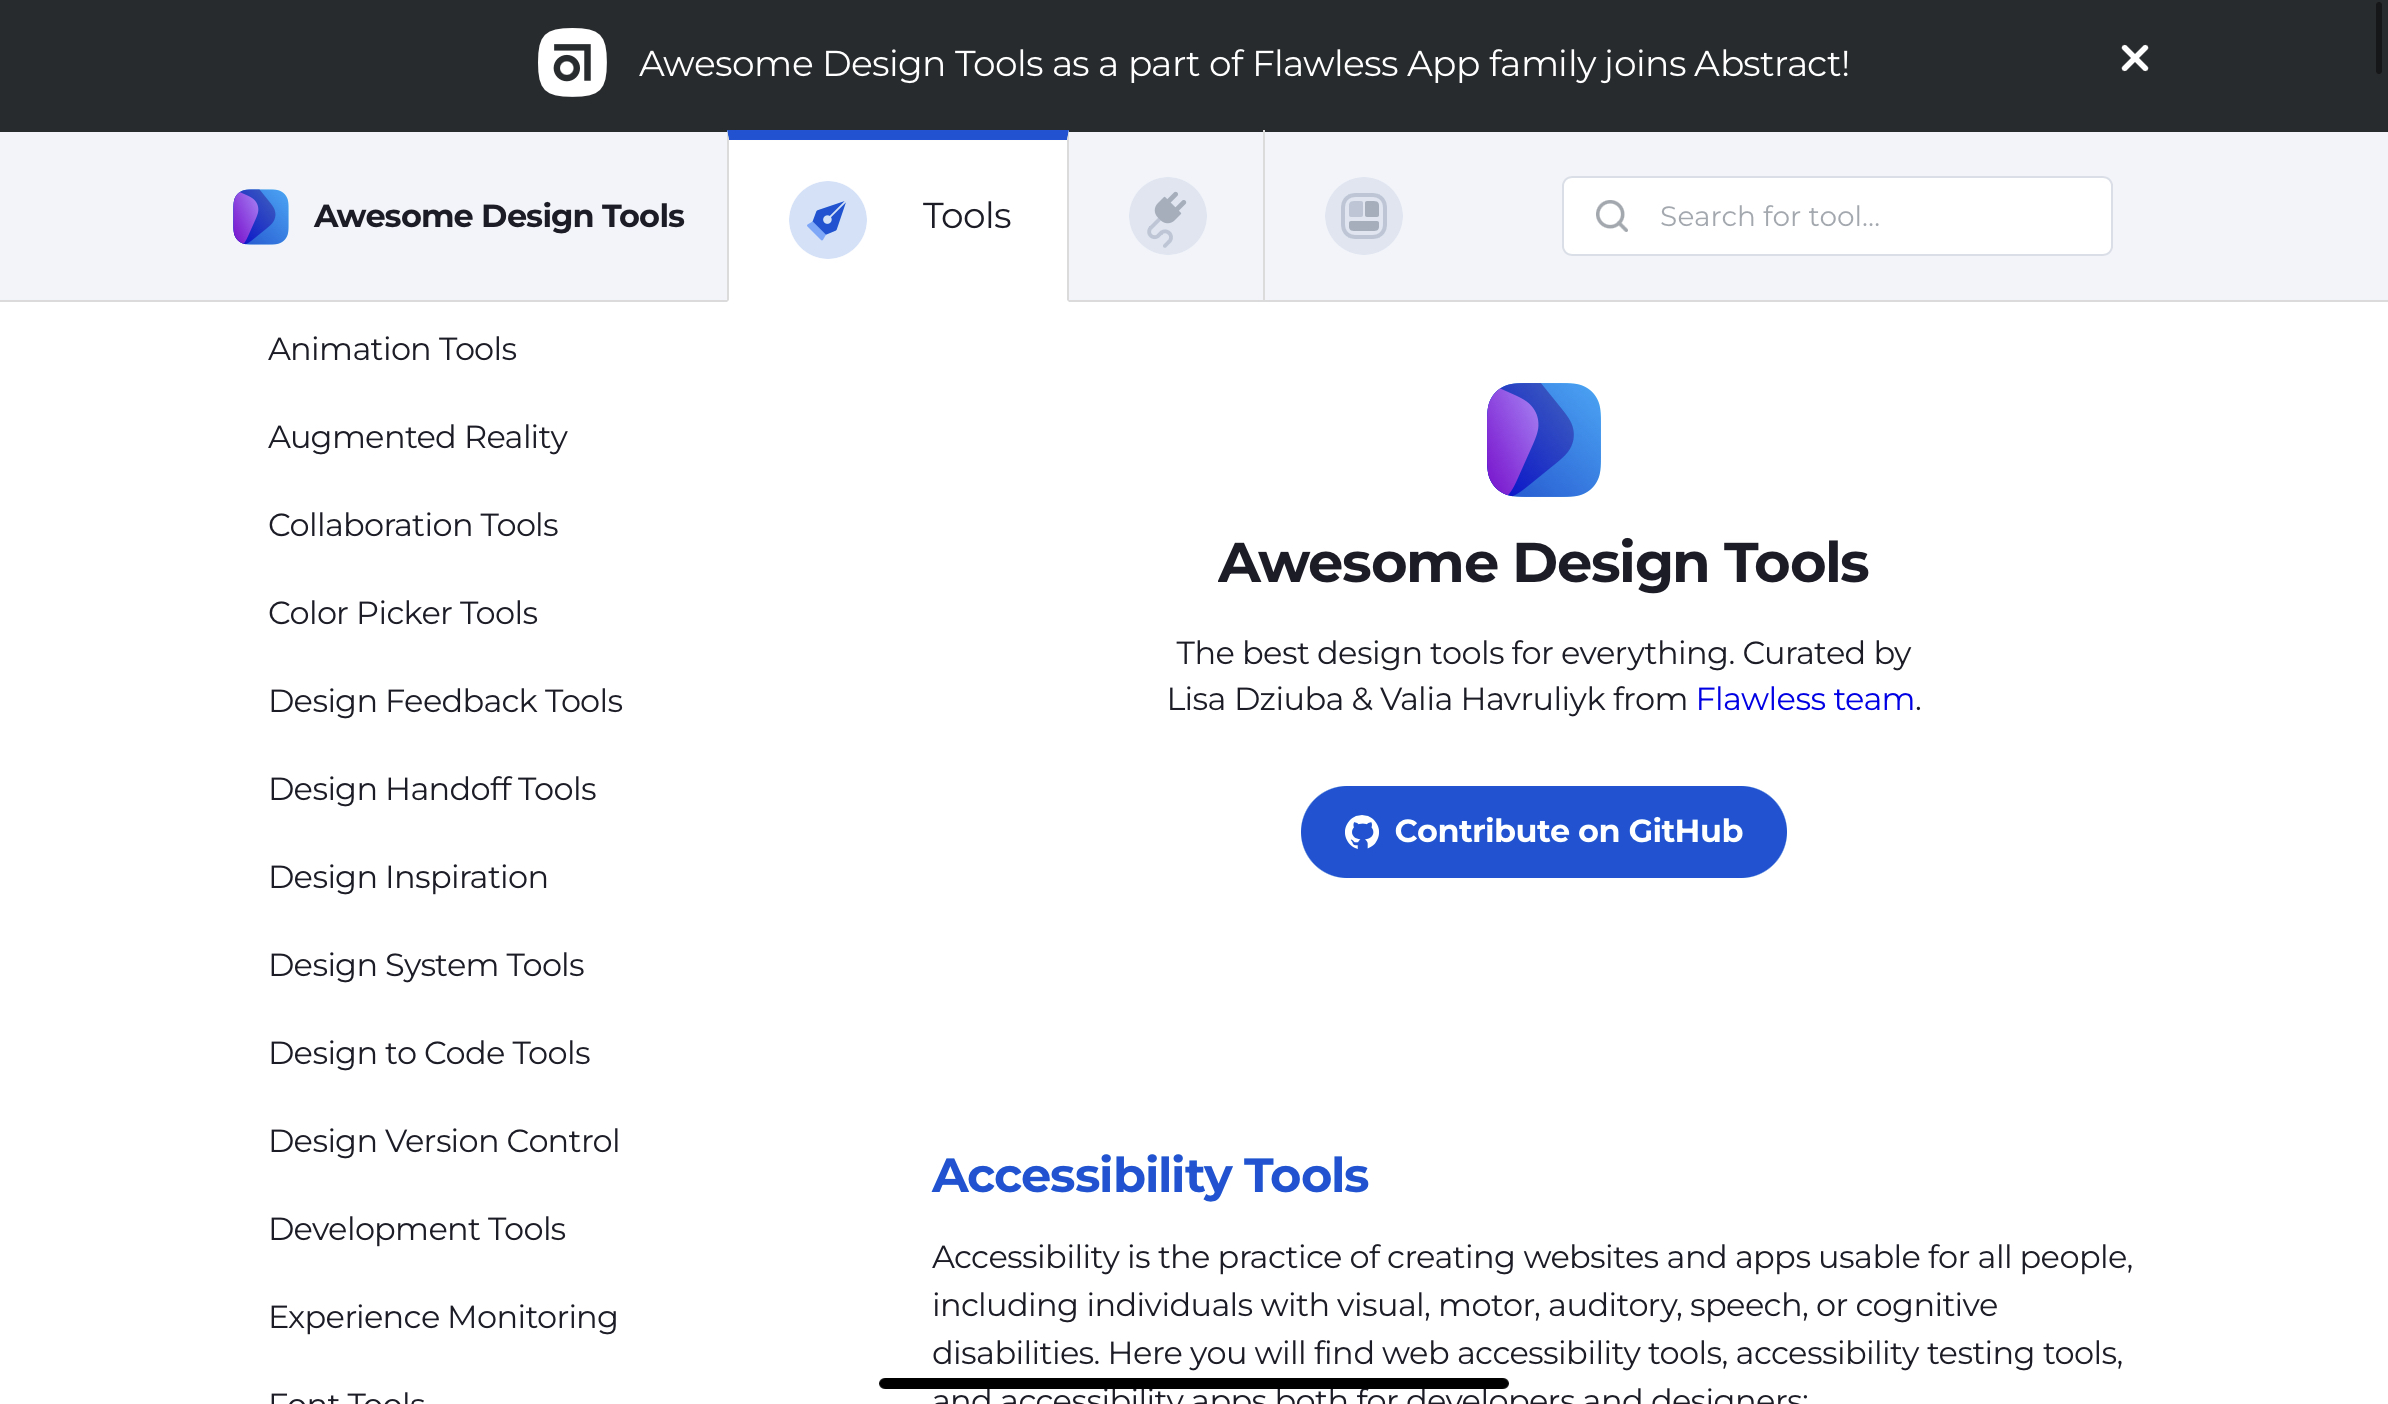 Screenshot of Awesome Design Tools